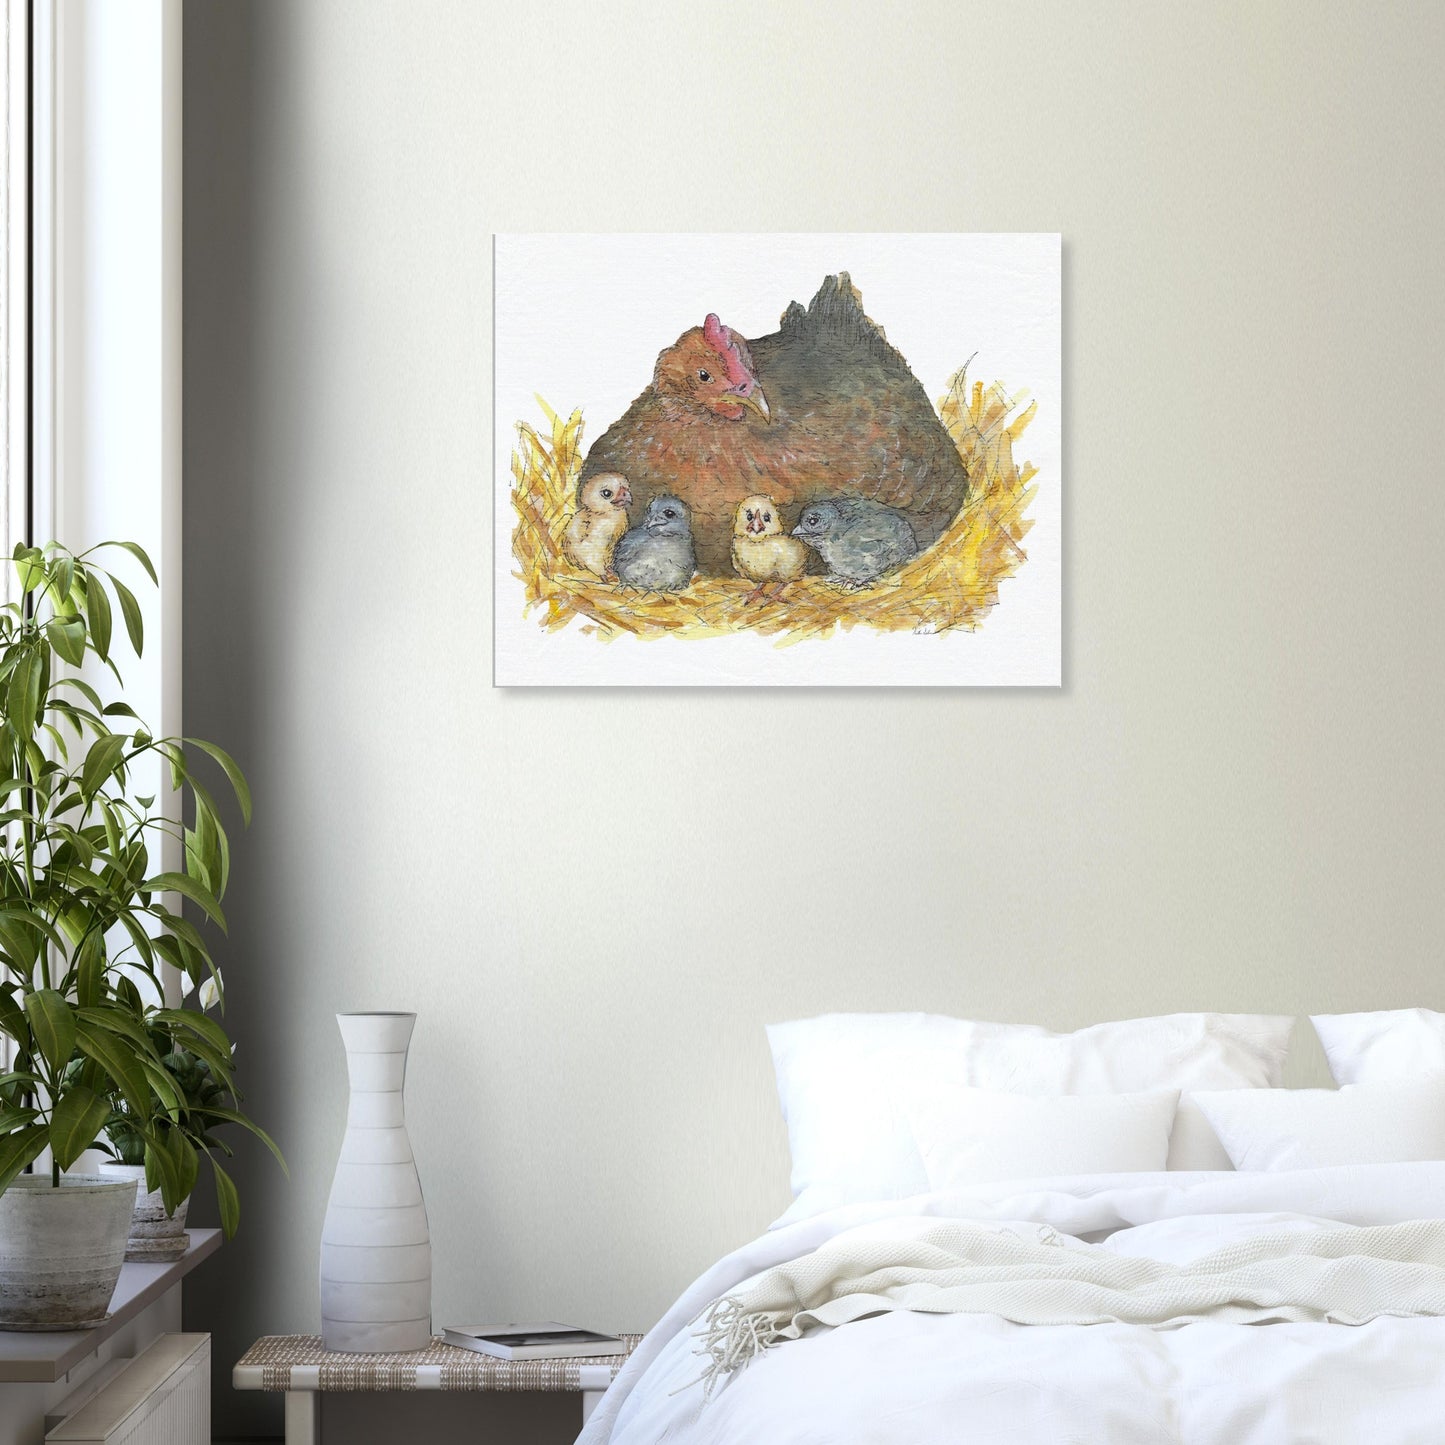 24 by 30 inch slim canvas Mother Hen print. Features a watercolor mother hen and her four chicks in a nest. Shown on tan wall above white bed.